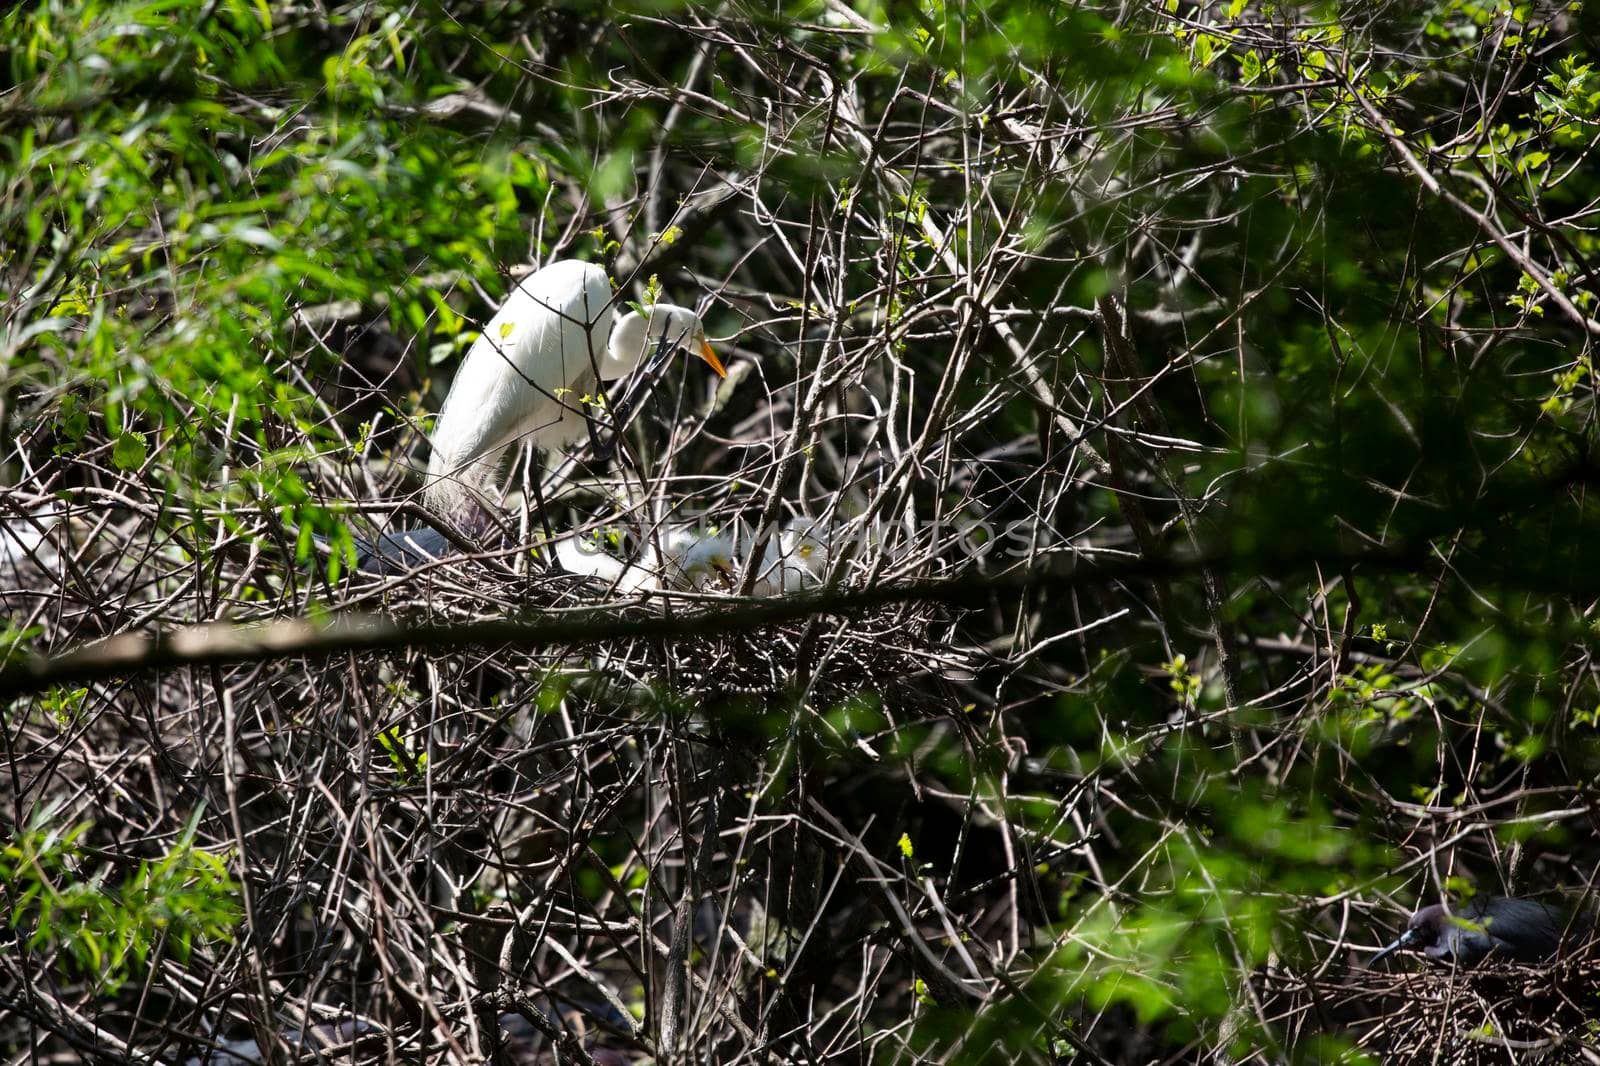 Great Egret Guarding Its Chicks by tornado98